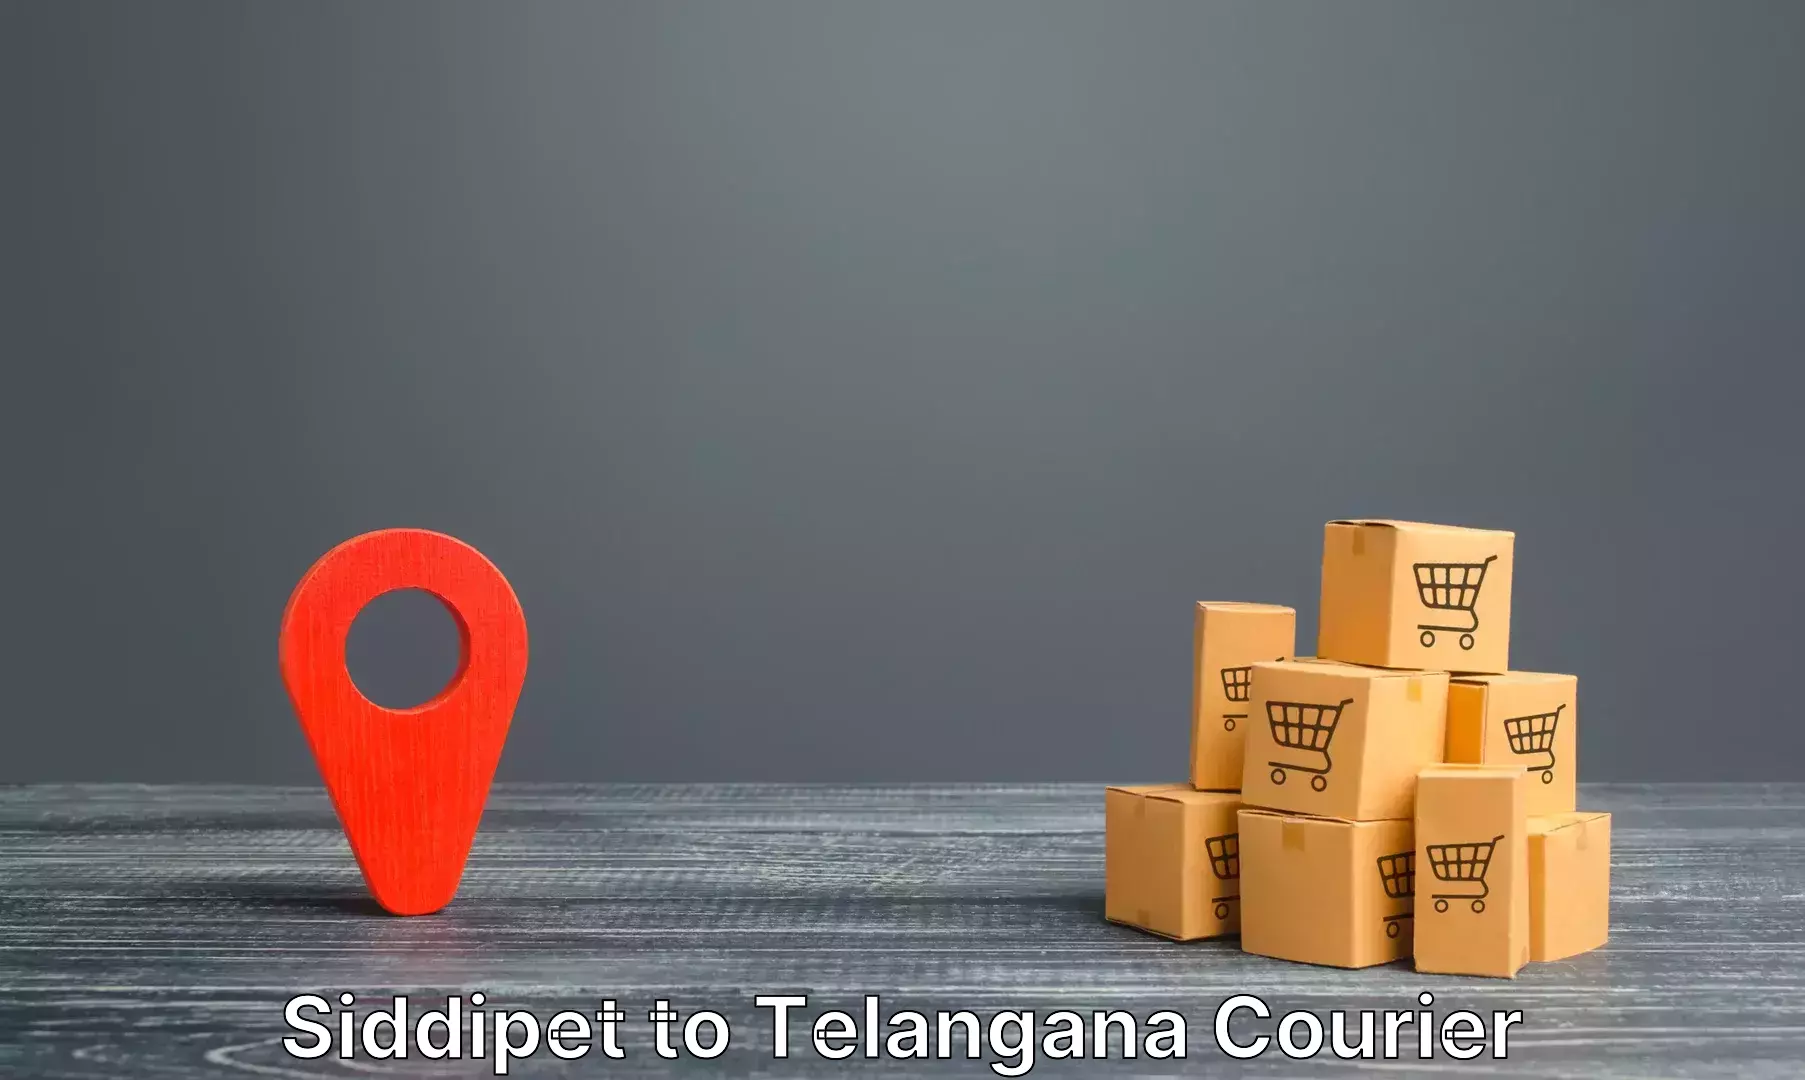 Luggage delivery network Siddipet to Rangareddy